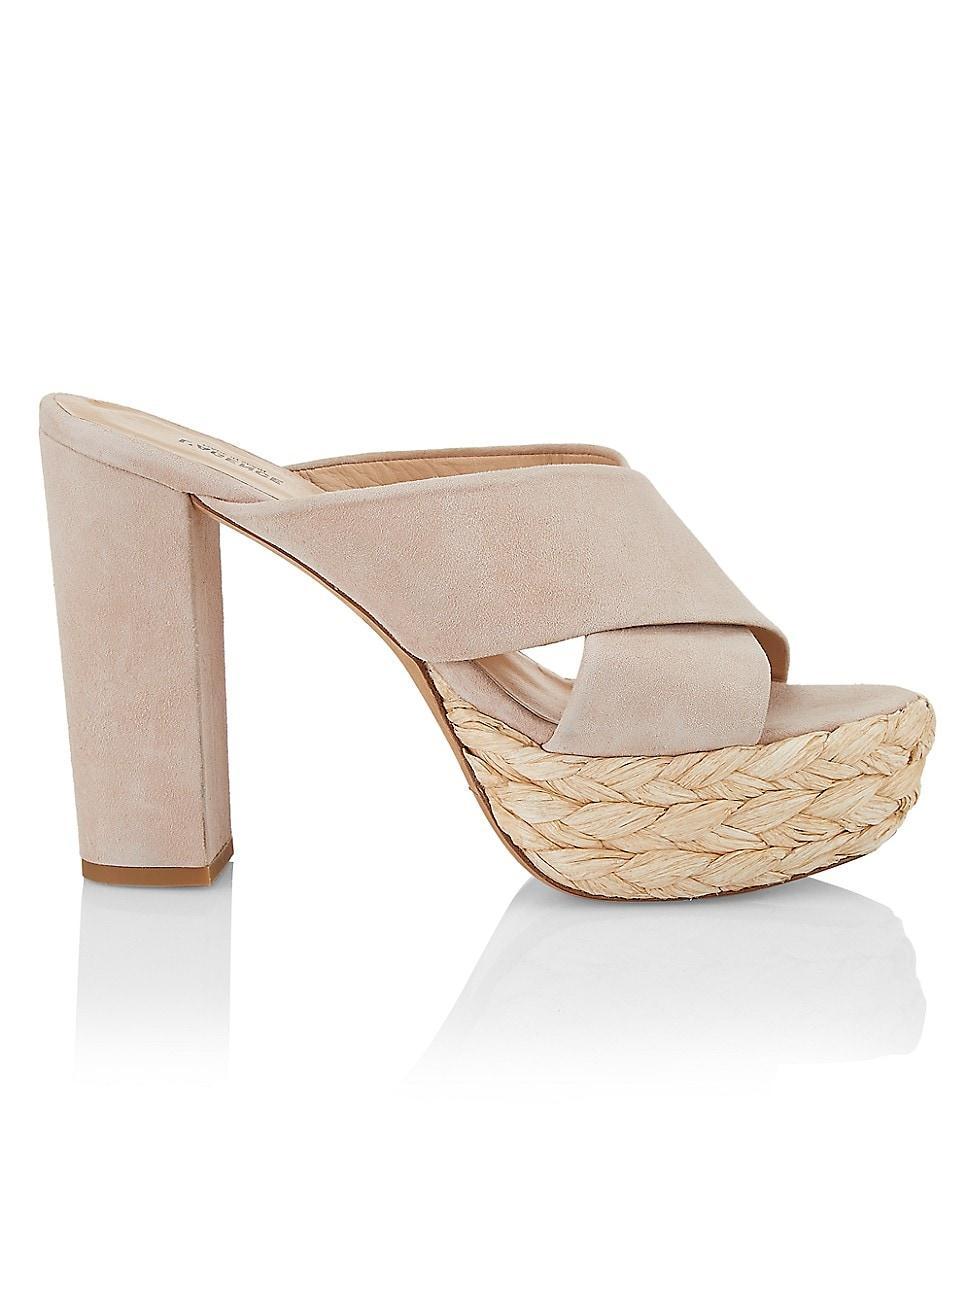 LAGENCE Lucca Sandal Product Image